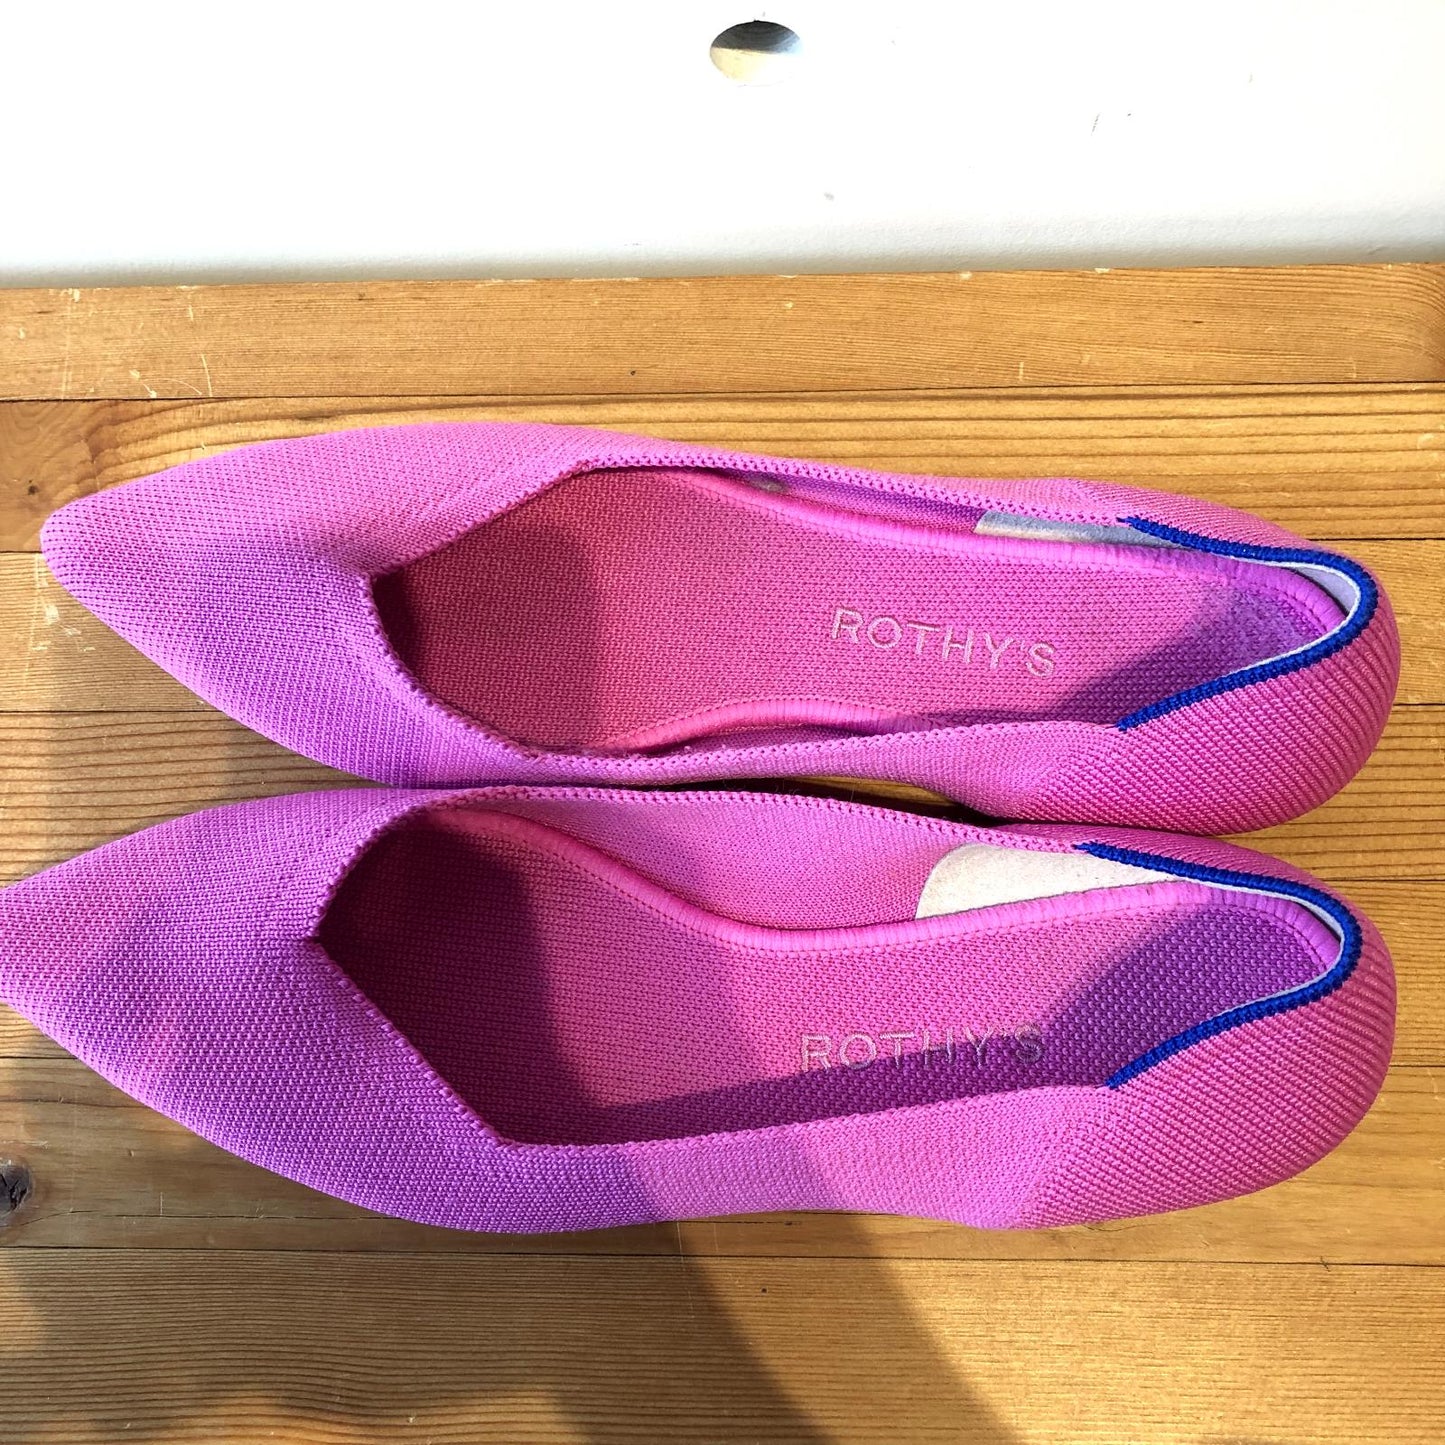 9 - Rothy's Pink Fuchsia Knit Retired Ballet Flats Pointed Toe Shoes 0316AO